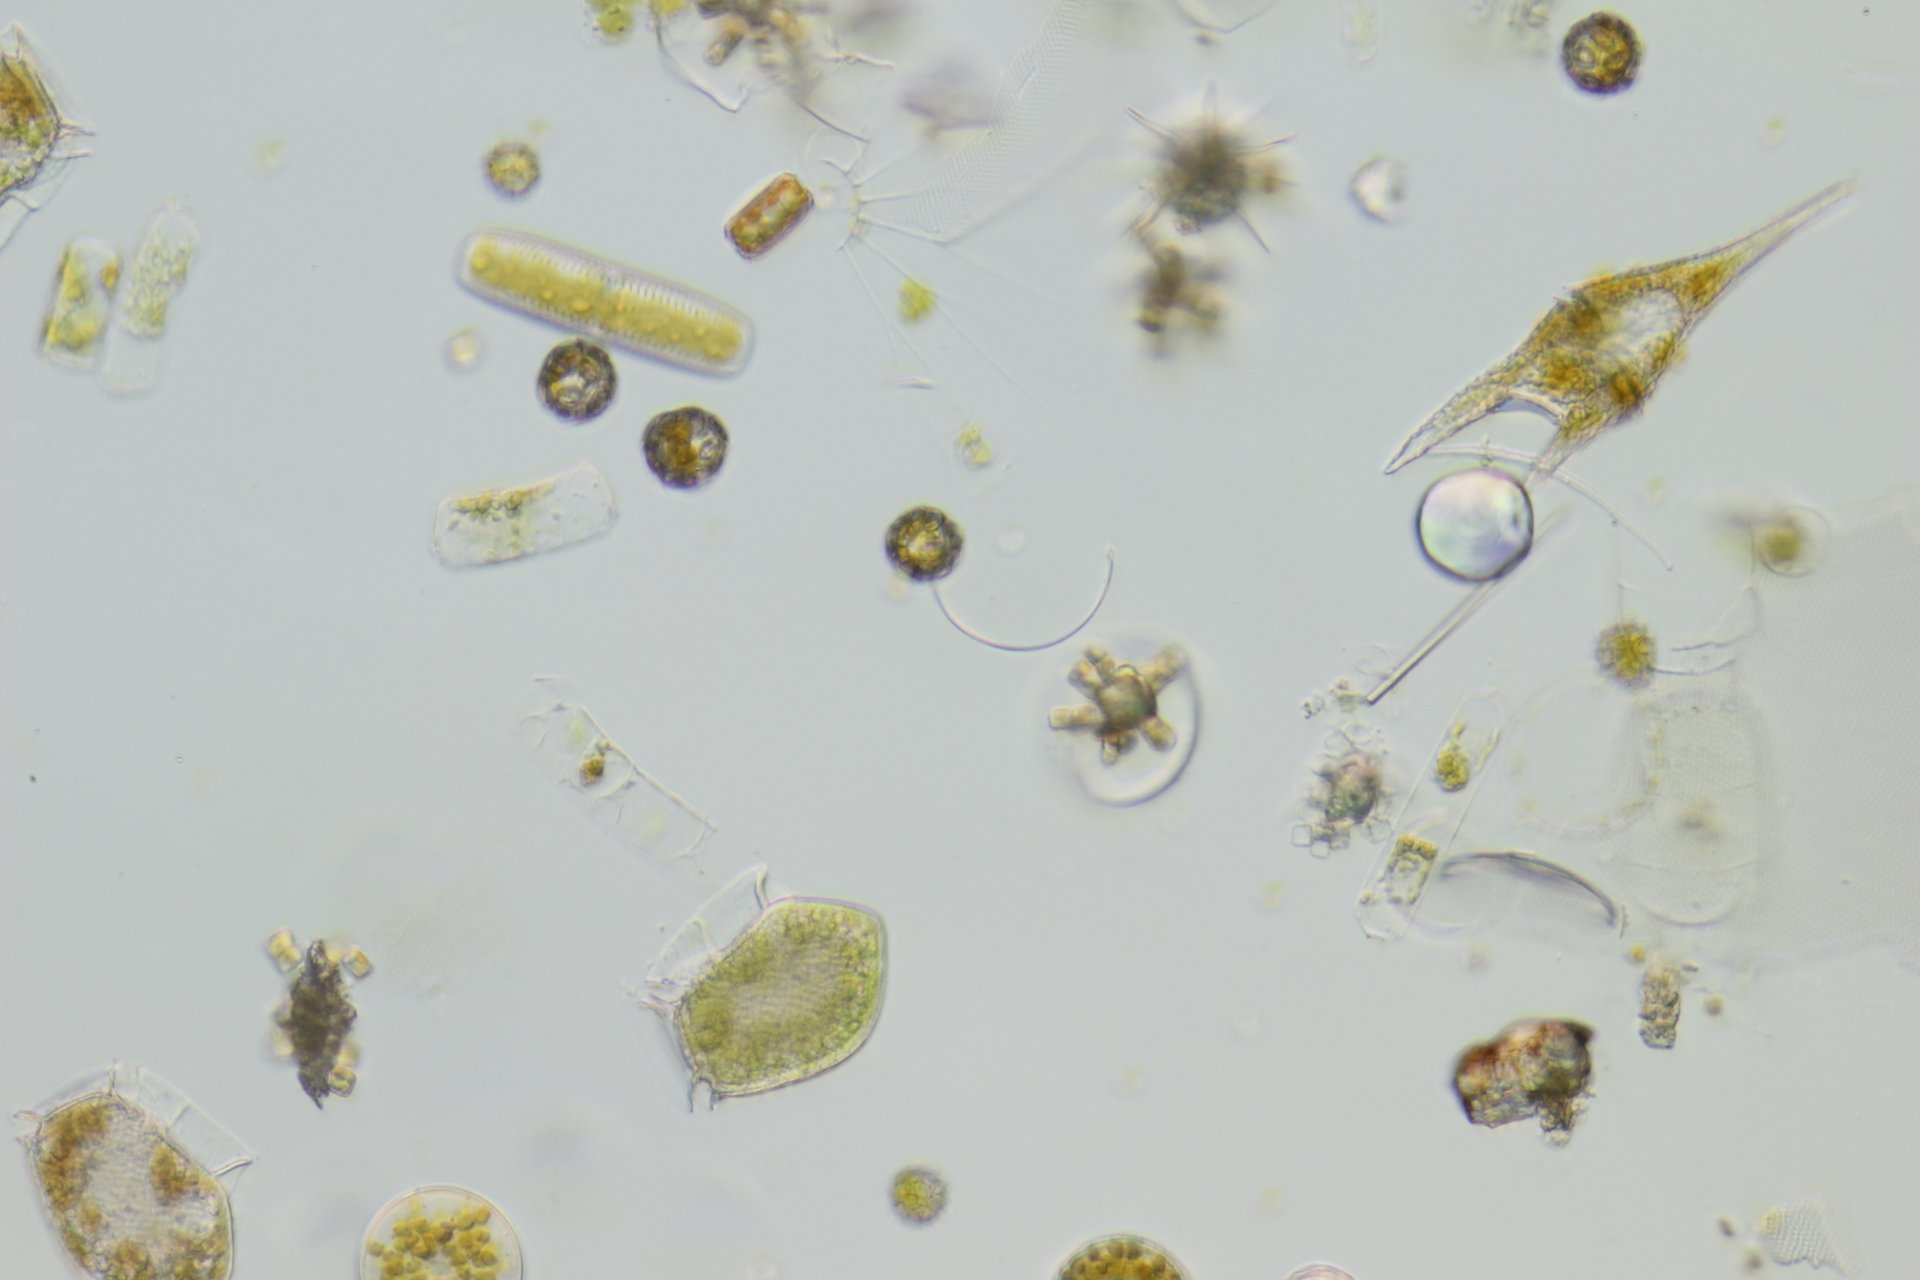 Phytoplankton (or microalgae) in the Canary Islands upwelling area. (© Max Planck Institute for Marine Microbiology)